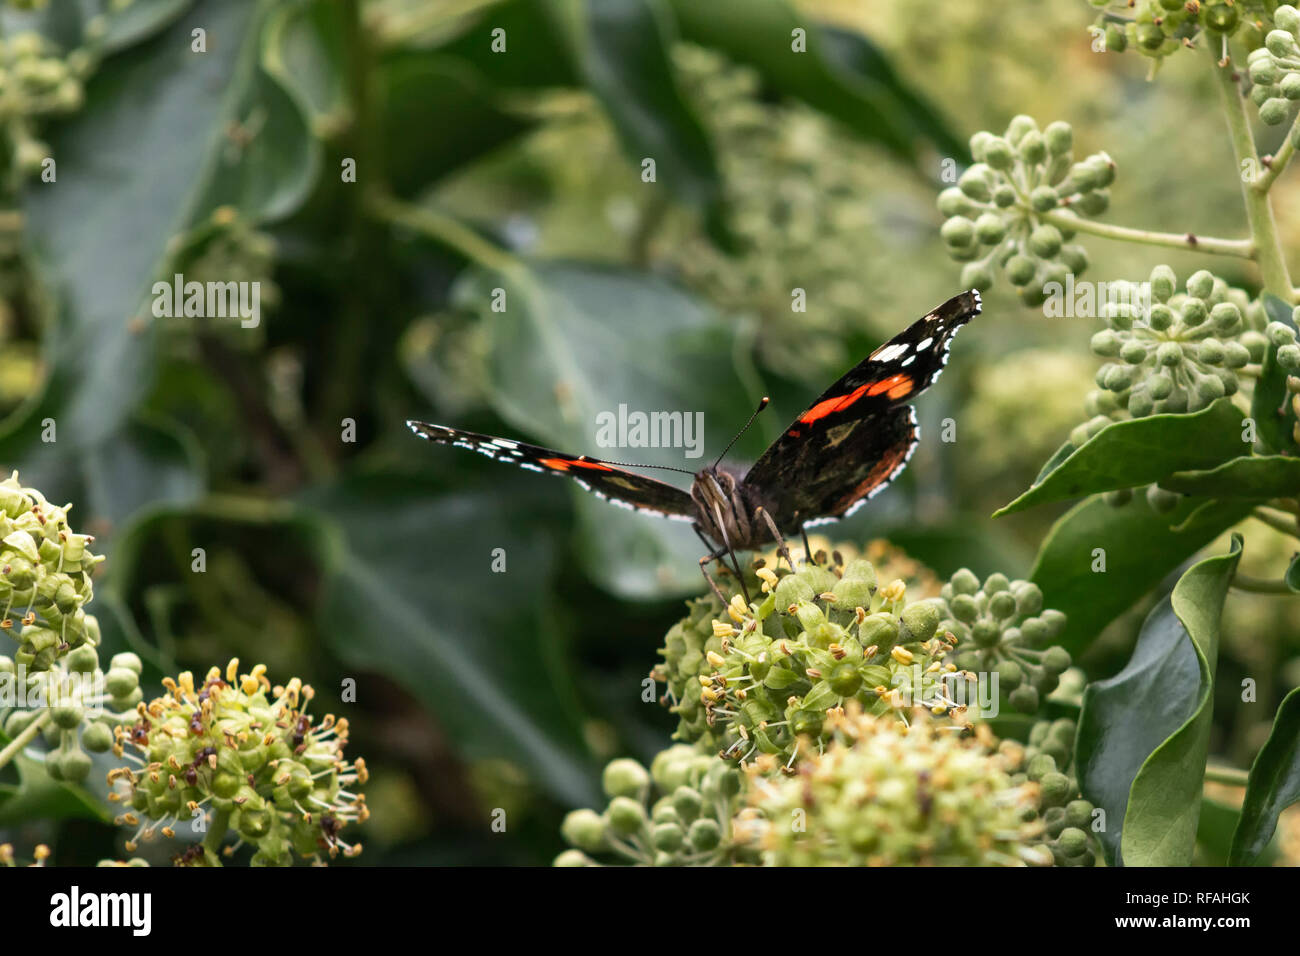 Close up of a red admiral butterfly Stock Photo